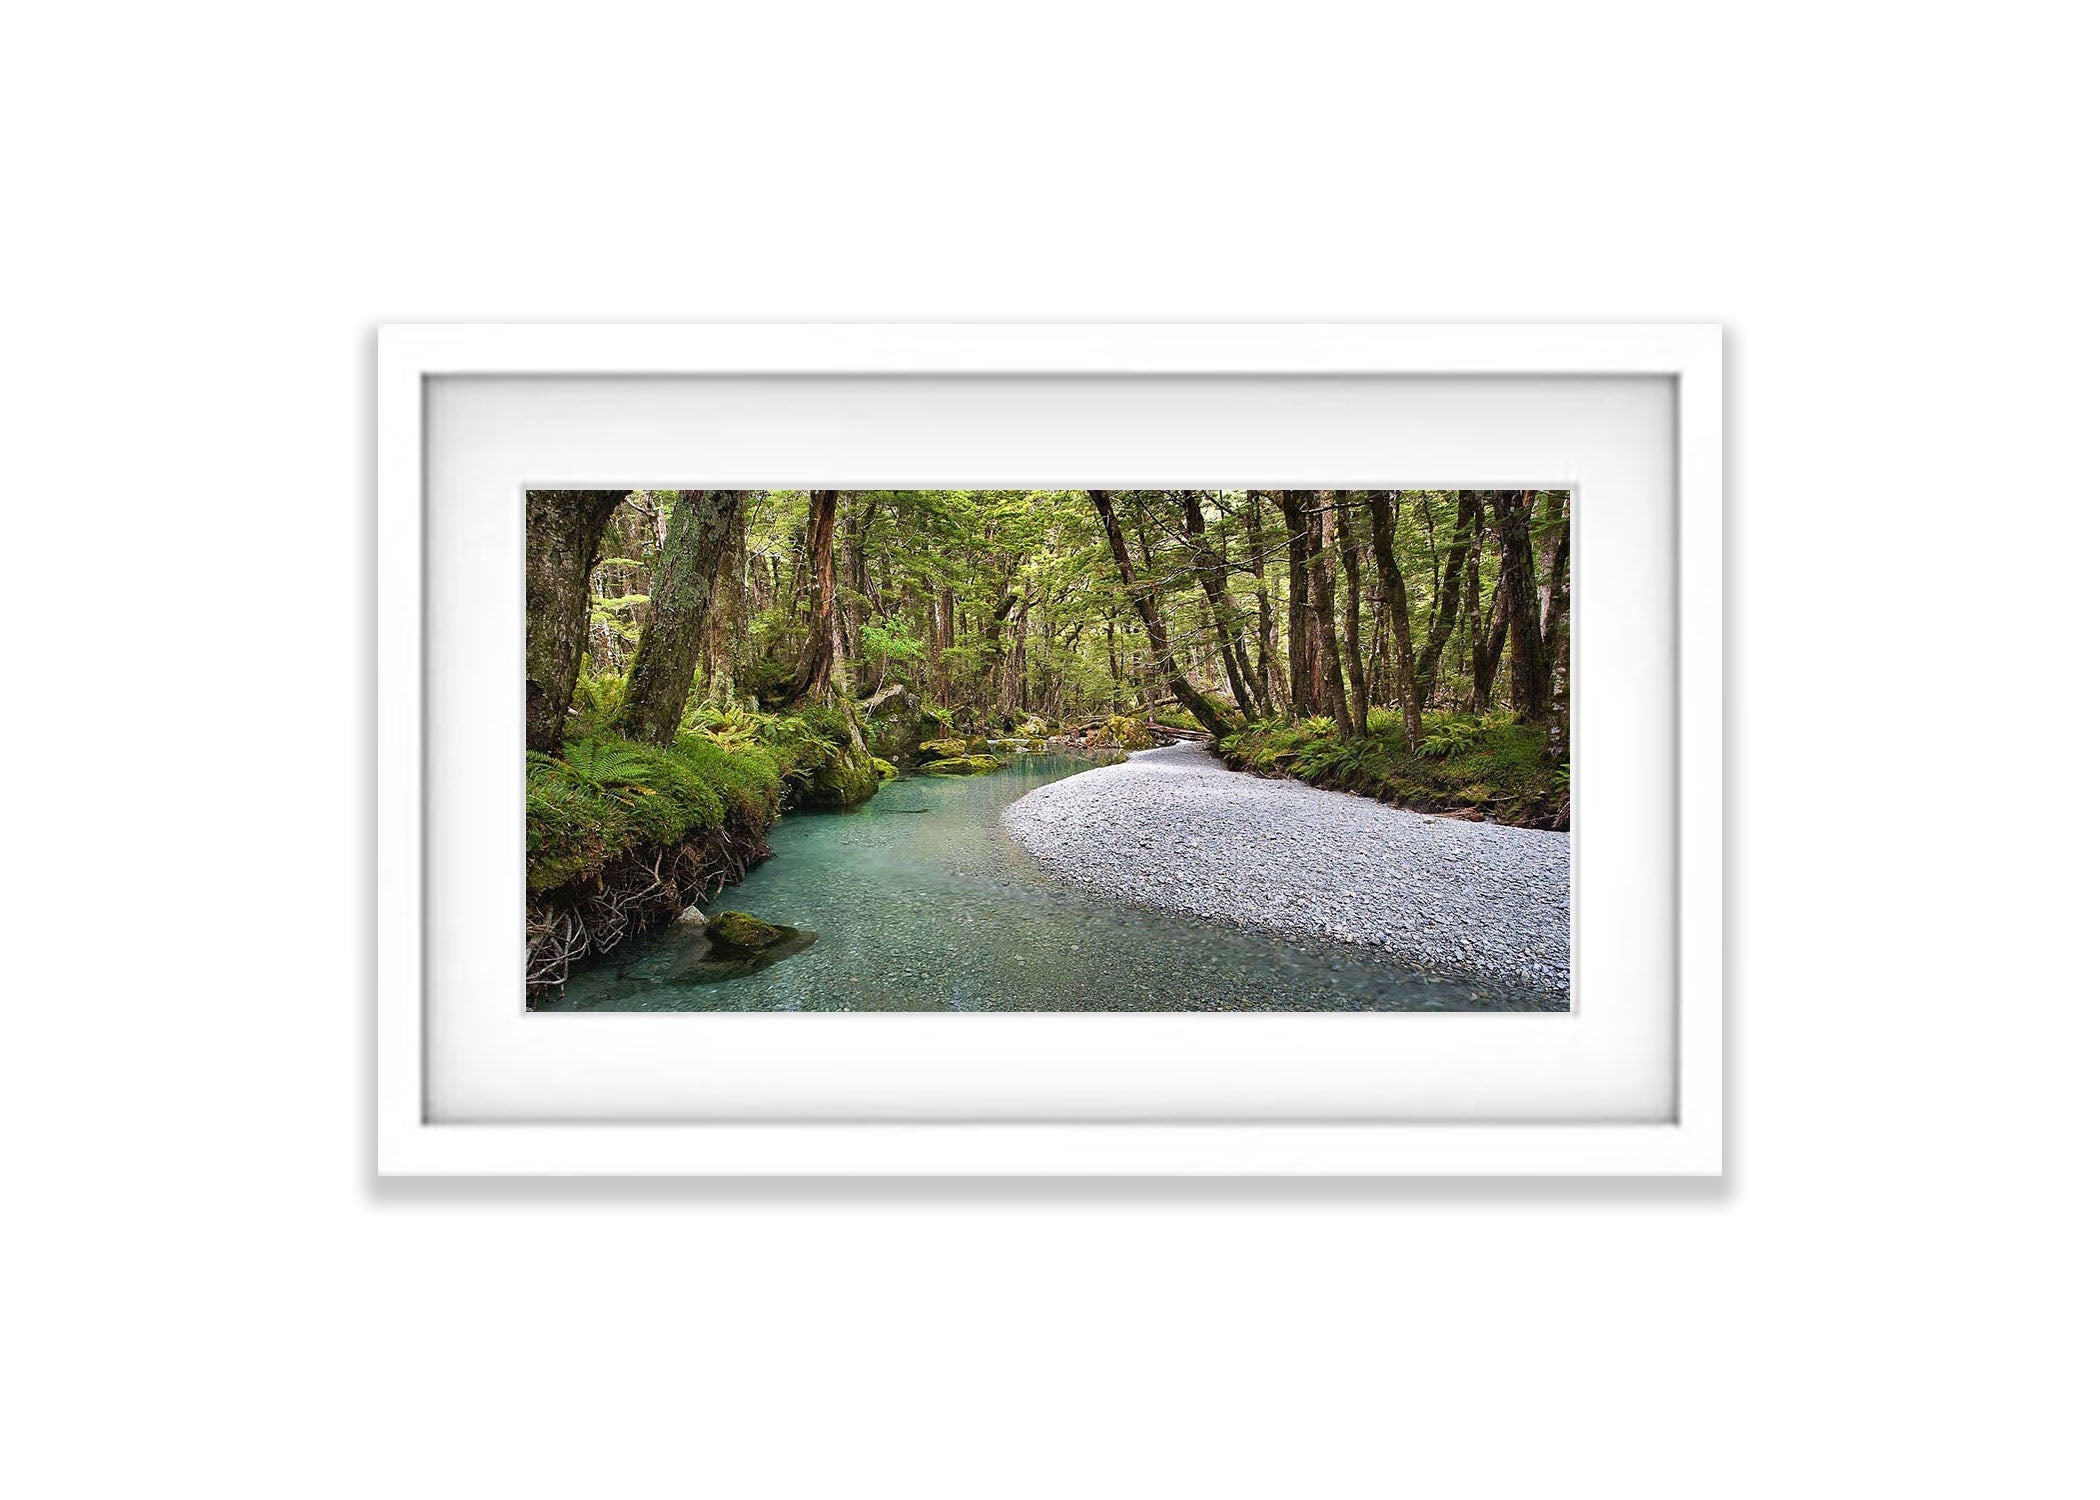 A Quiet Stream, Routeburn Track - New Zealand